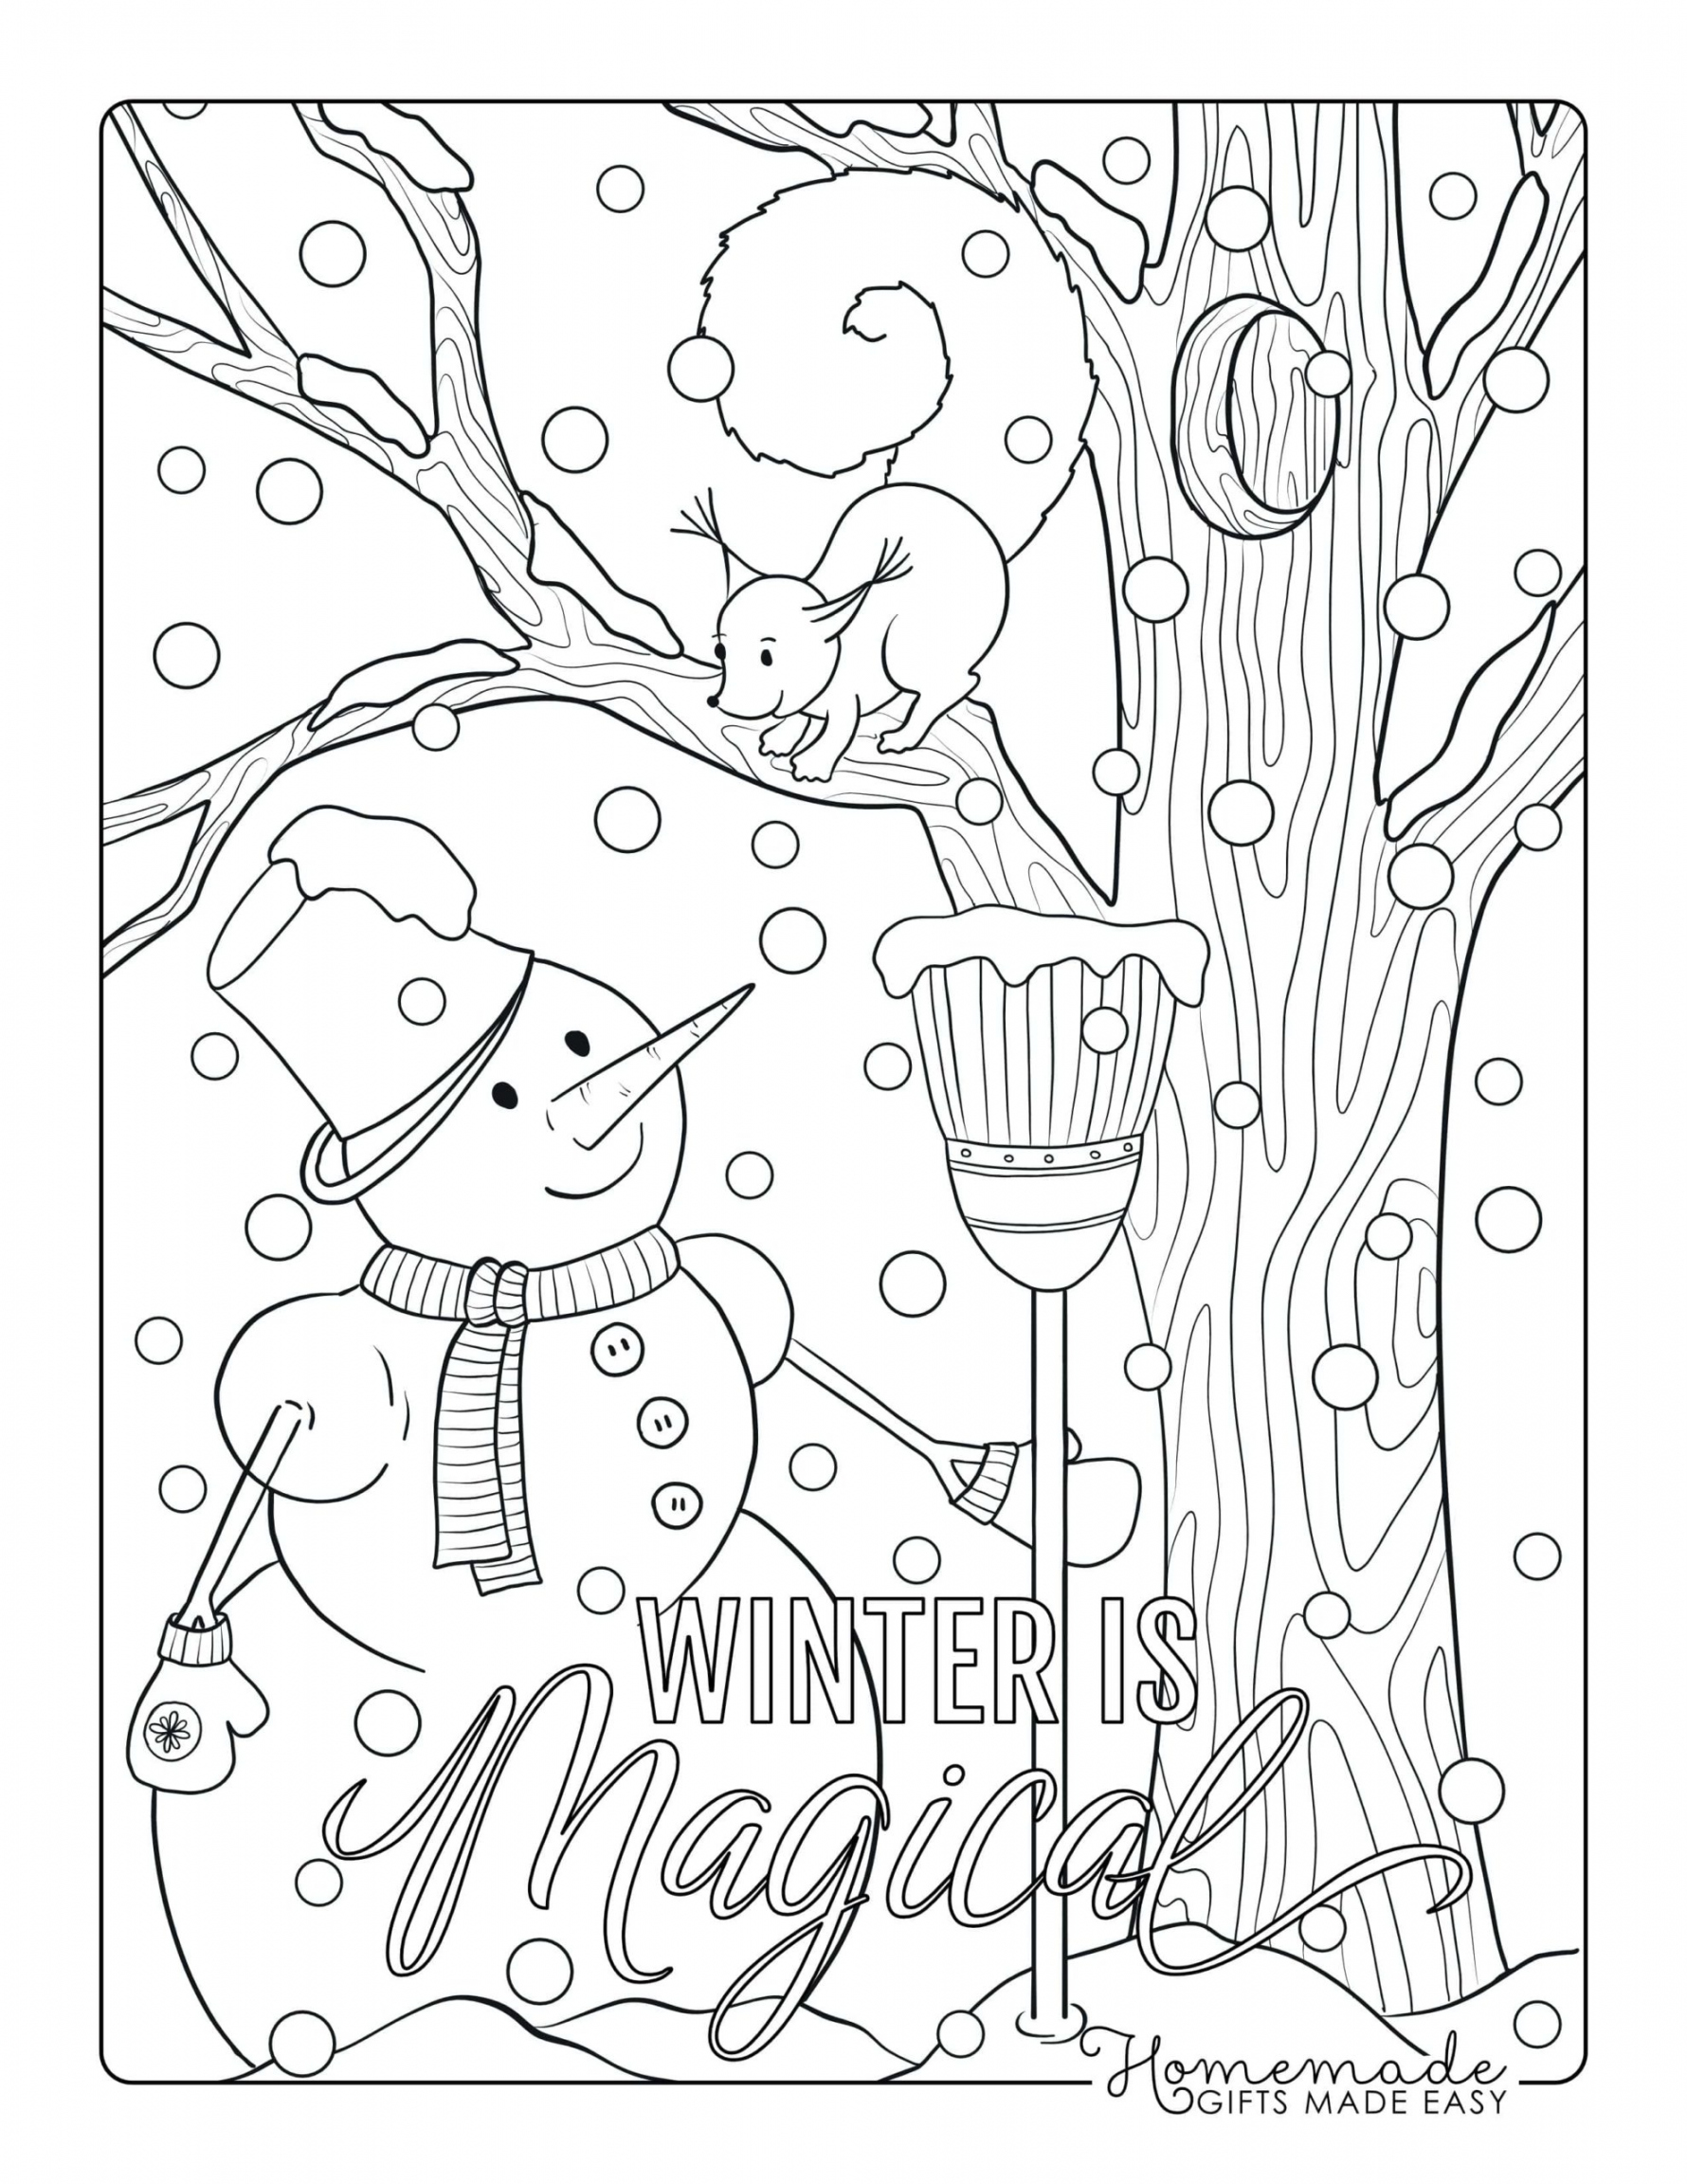 Free Printable Winter Coloring Pages - FREE Printable HQ